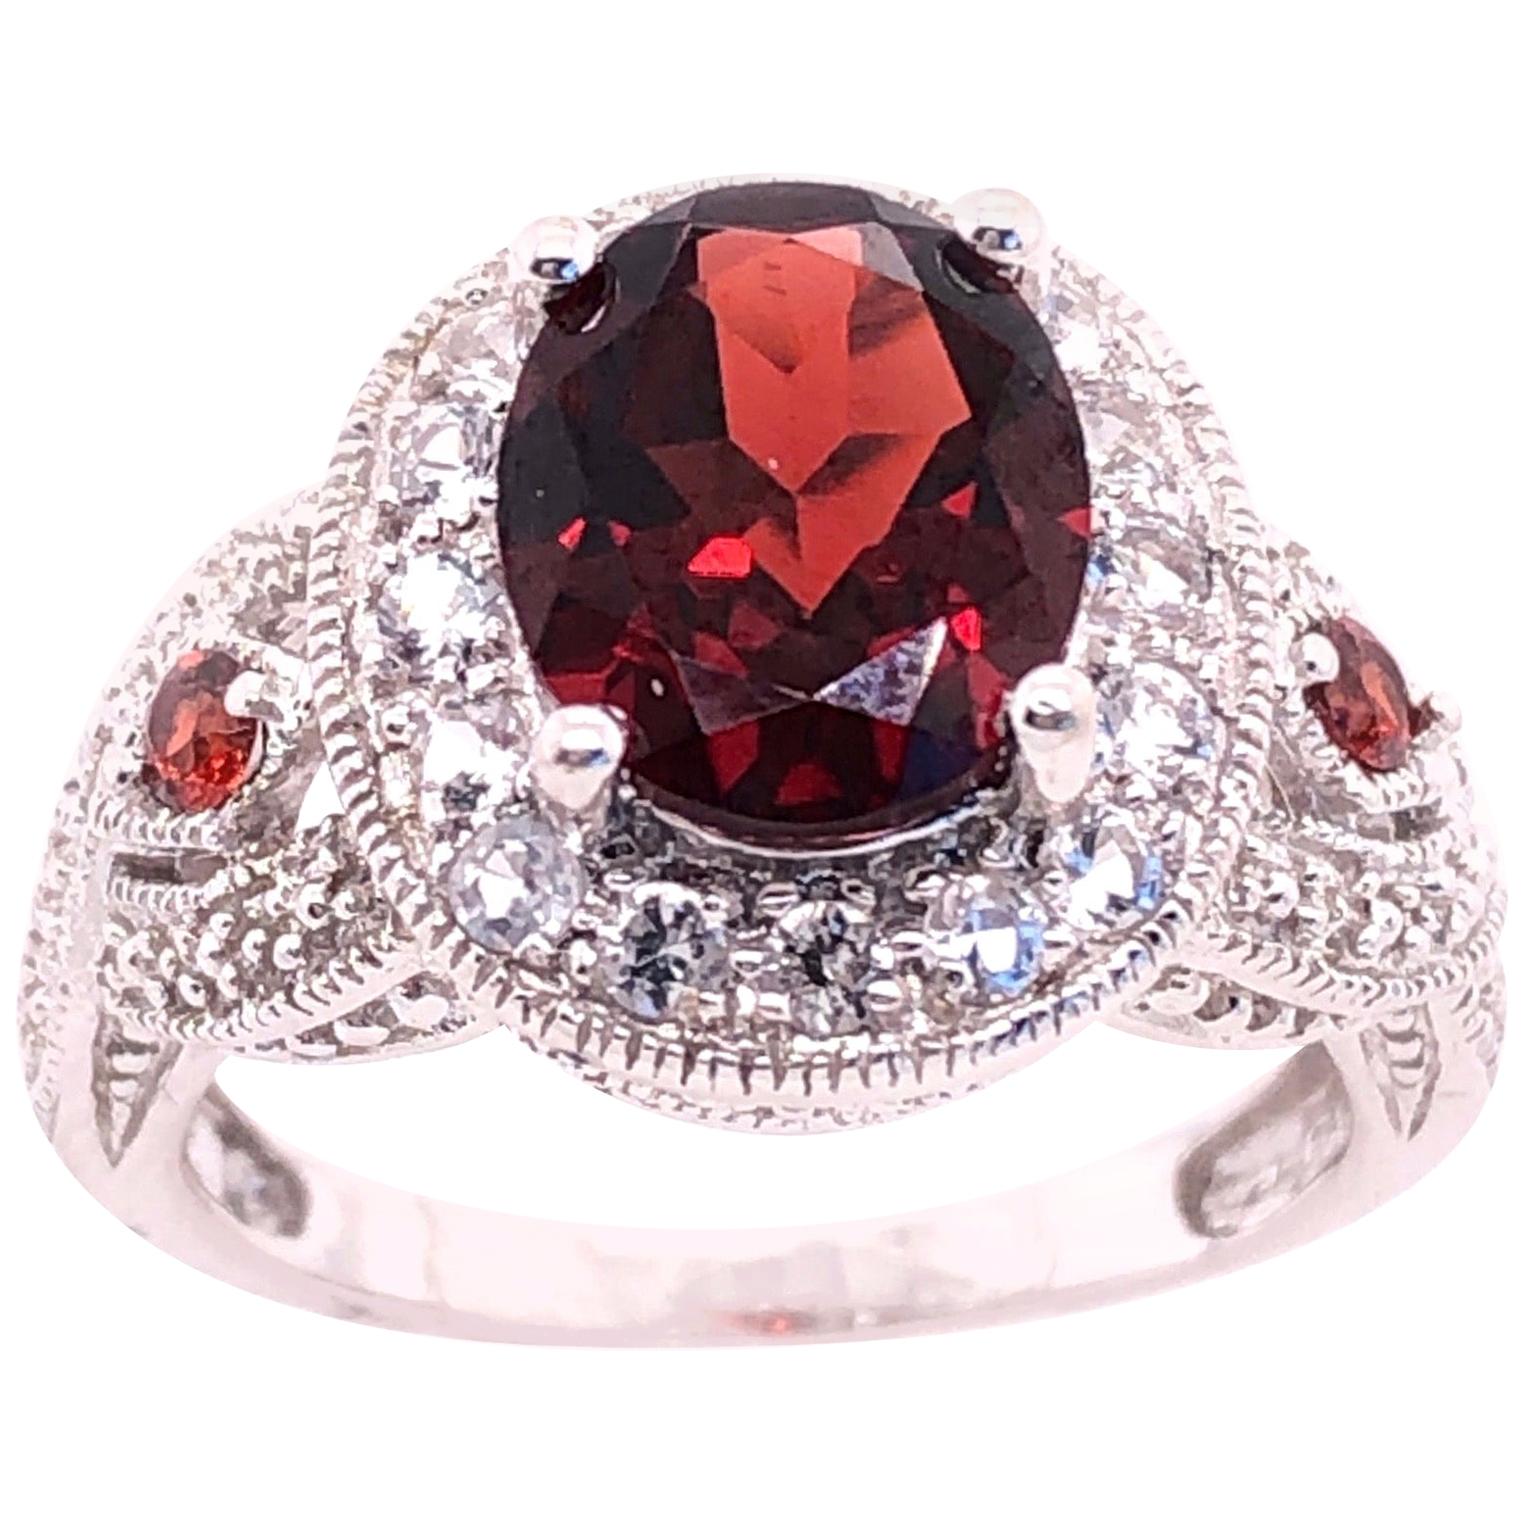 14 Karat White Gold Antique Ring Oval Garnet Center with Accents